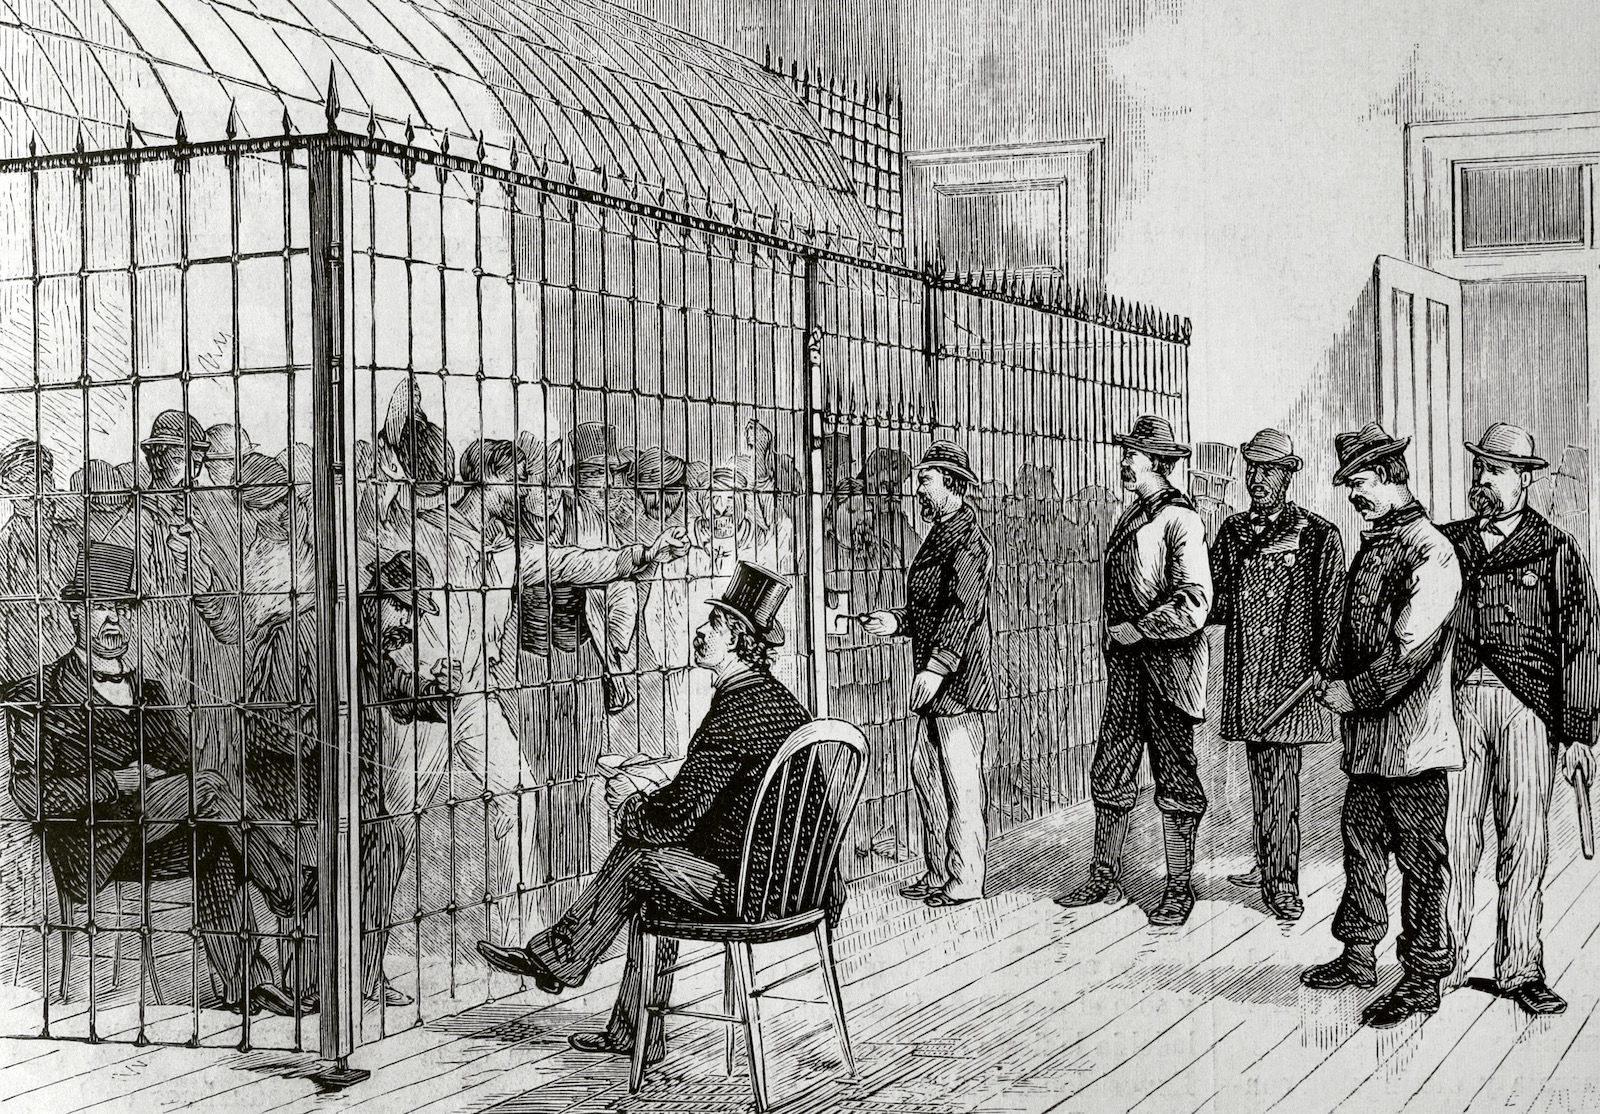 Engraving showing the detention of men who had tried to vote illegally